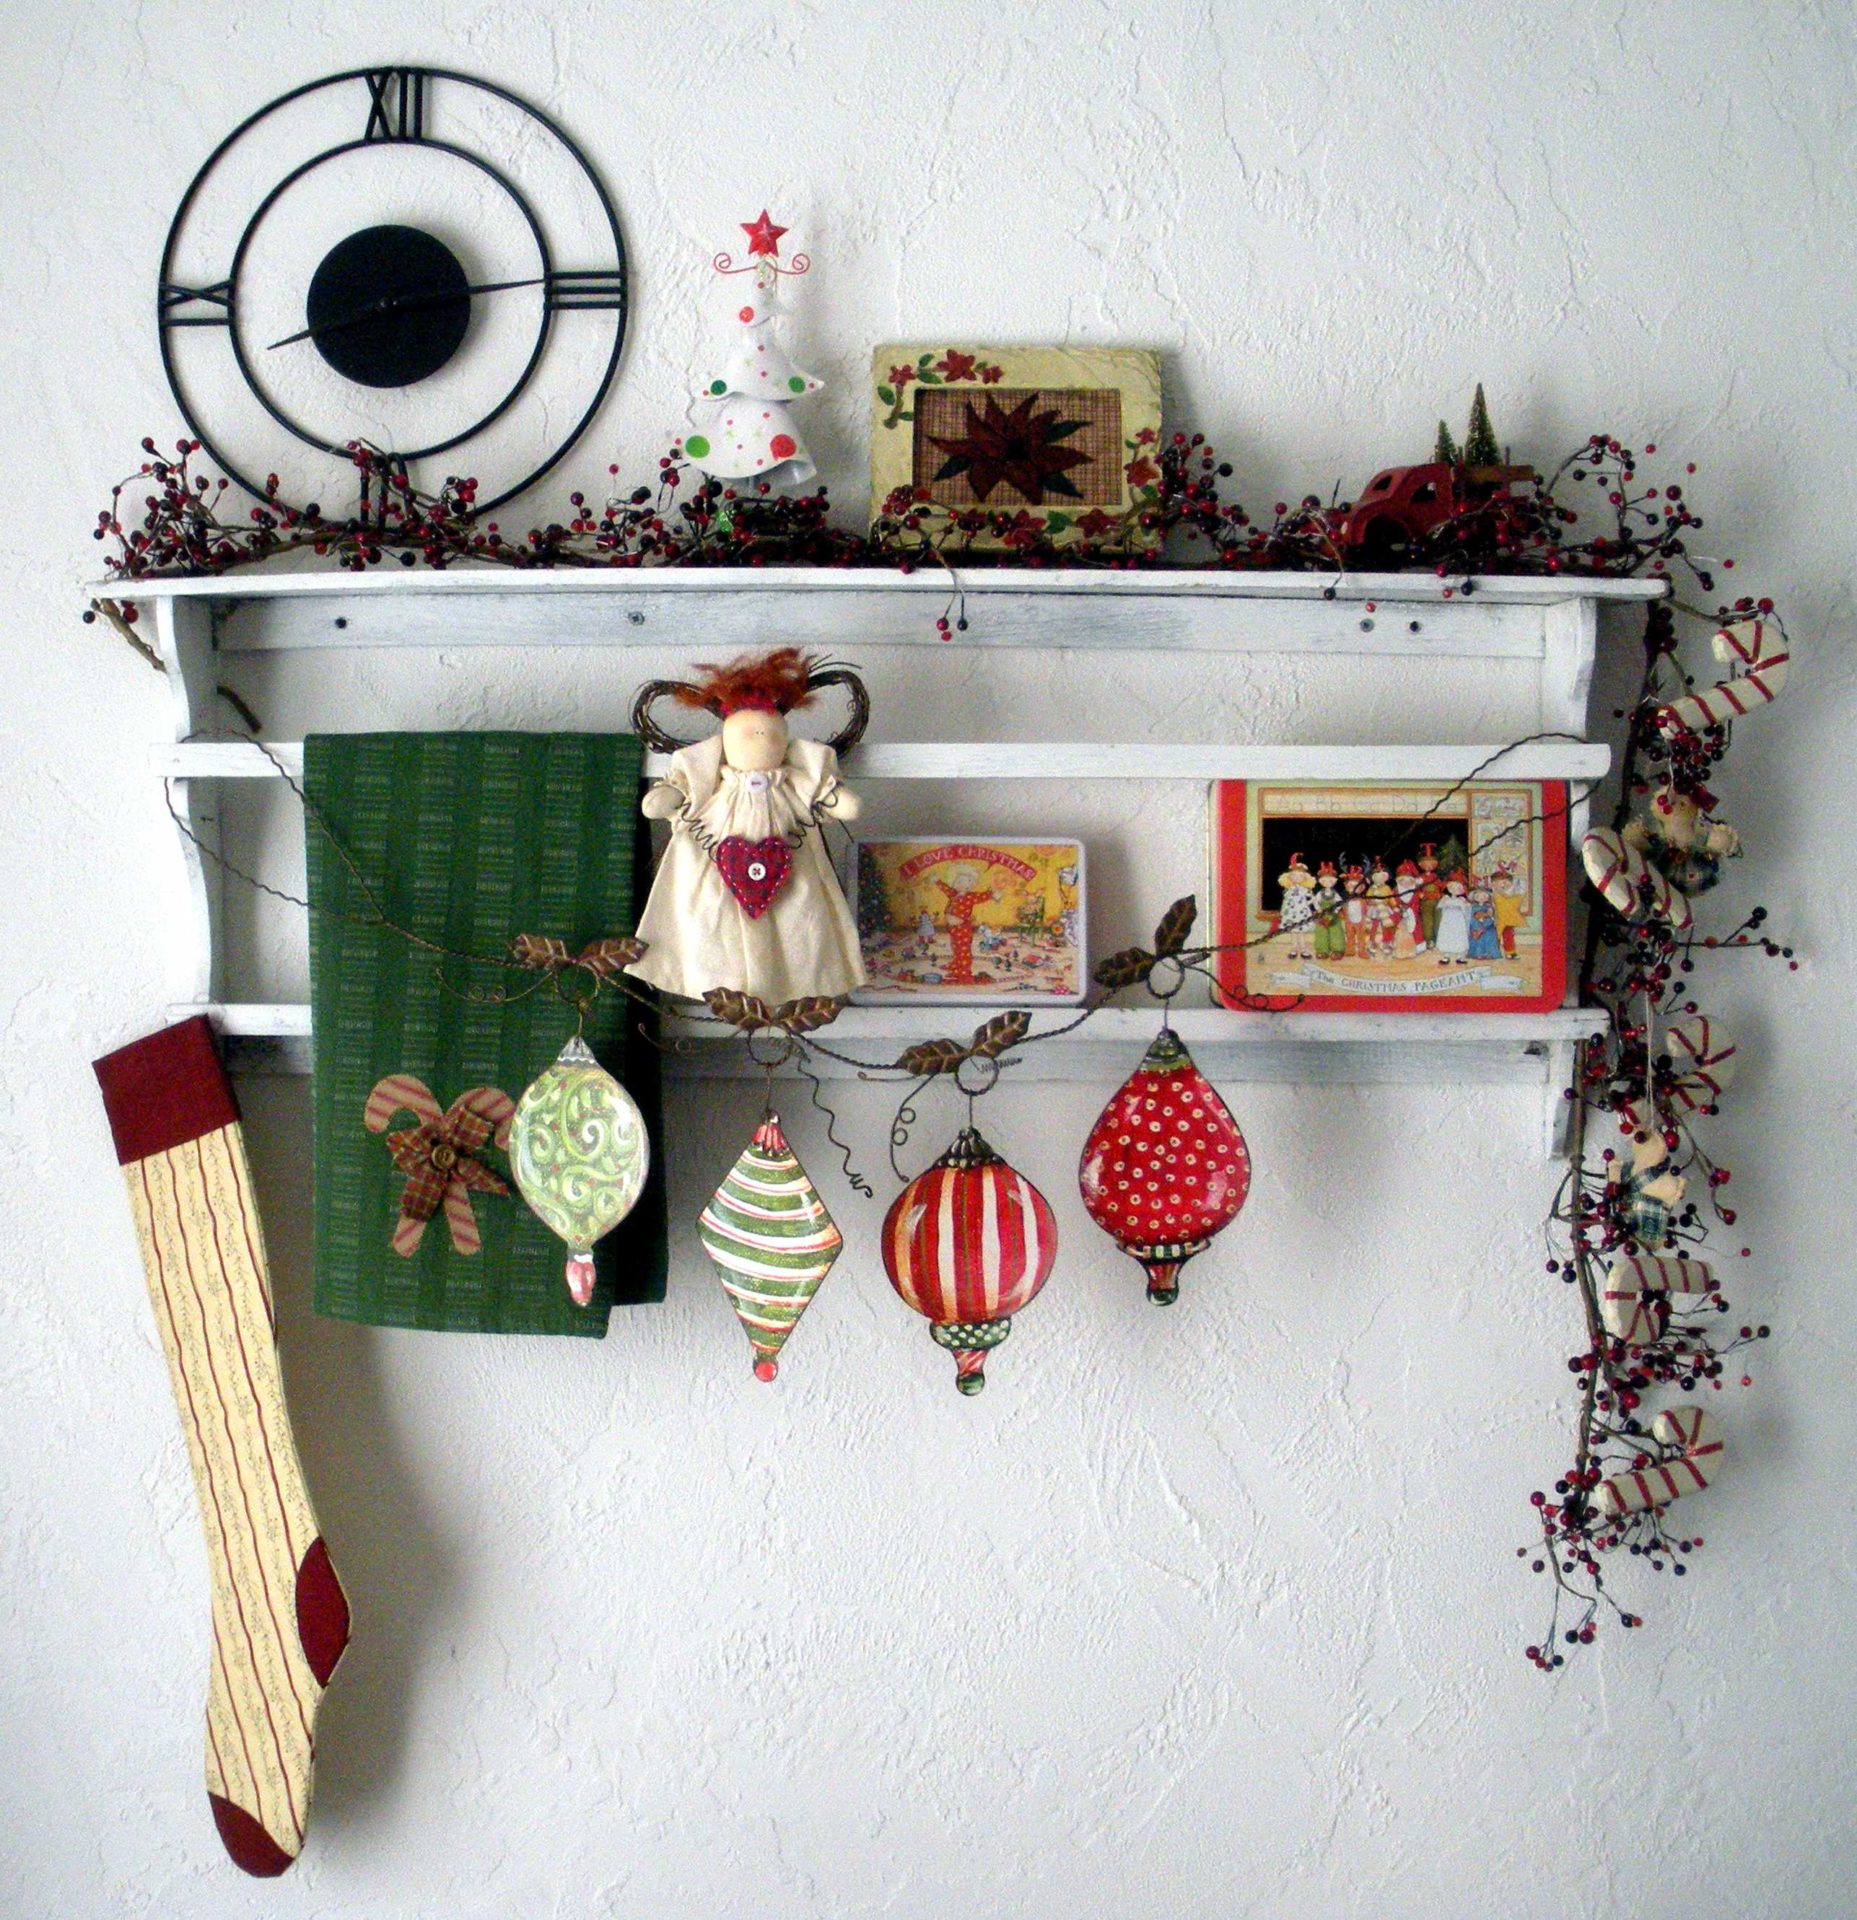 6 Holiday Decorating Tips for Your Space